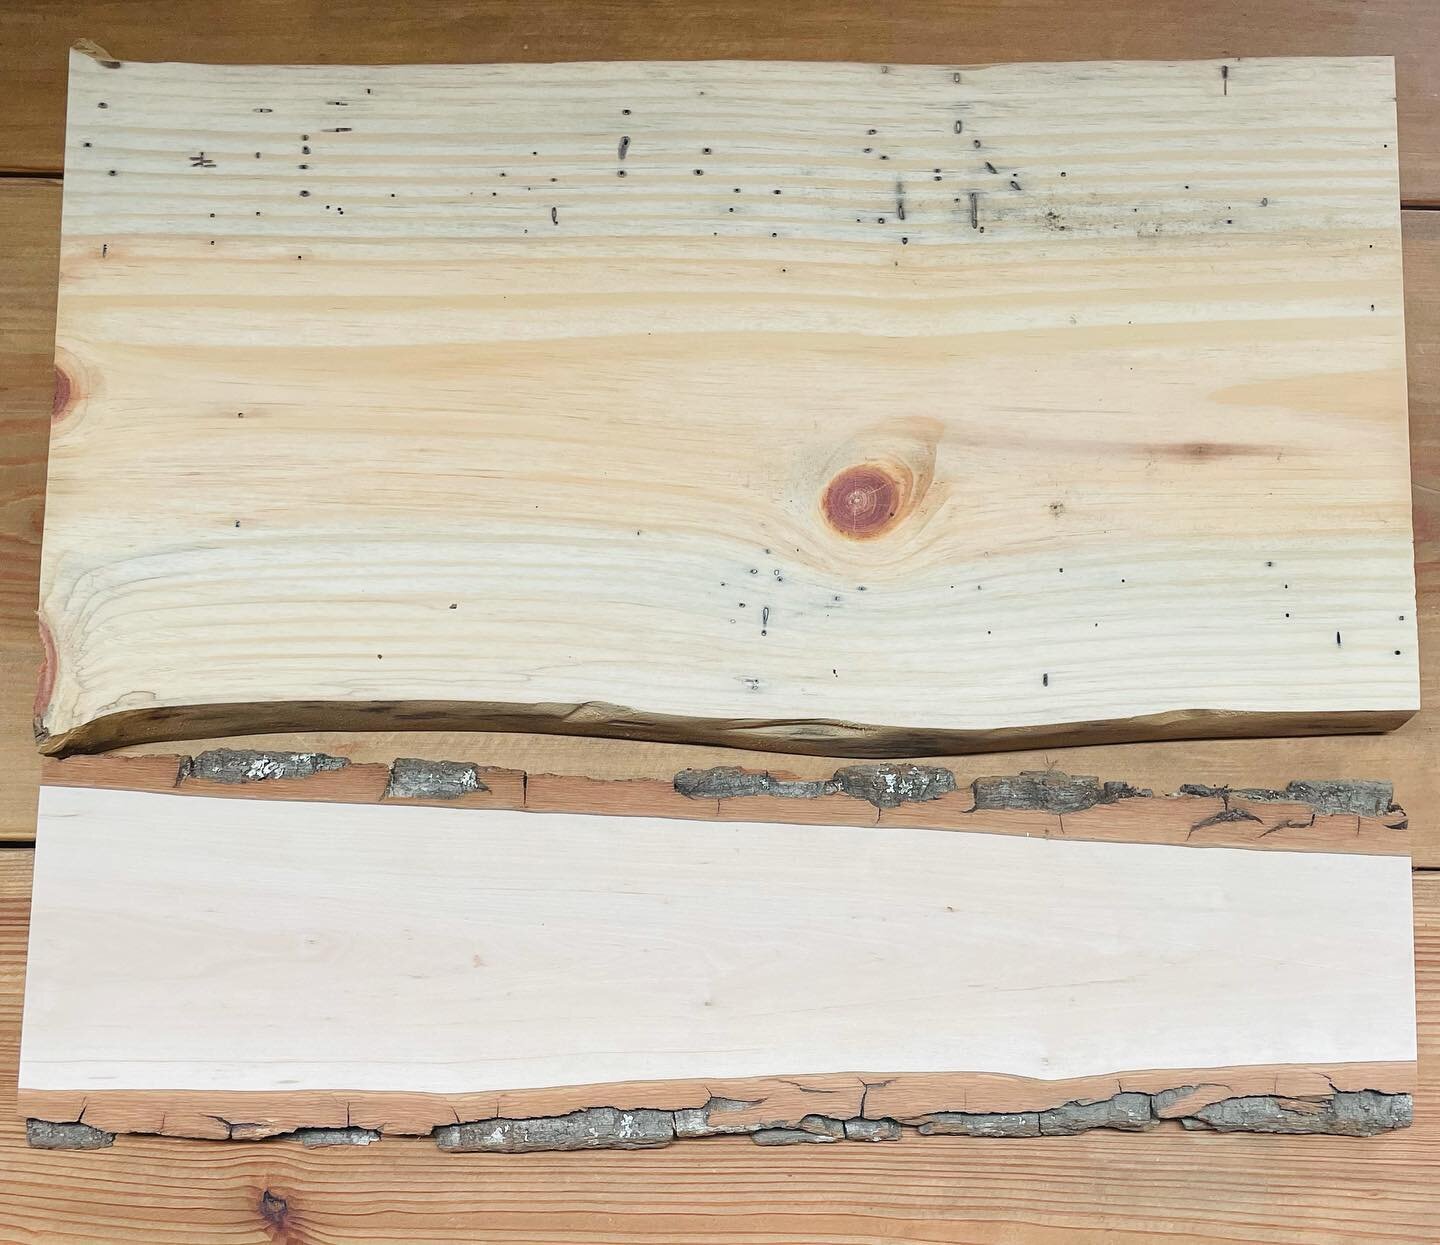 GIVEAWAY TIME!! 

The winner will get these 2 beautiful slabs. The larger piece is pine and the smaller piece is sourwood. 😊

How to enter:
1. Follow us @rusticwoodsupply
2. Like and Save this post (both are important for post visibility).
3. Tag yo